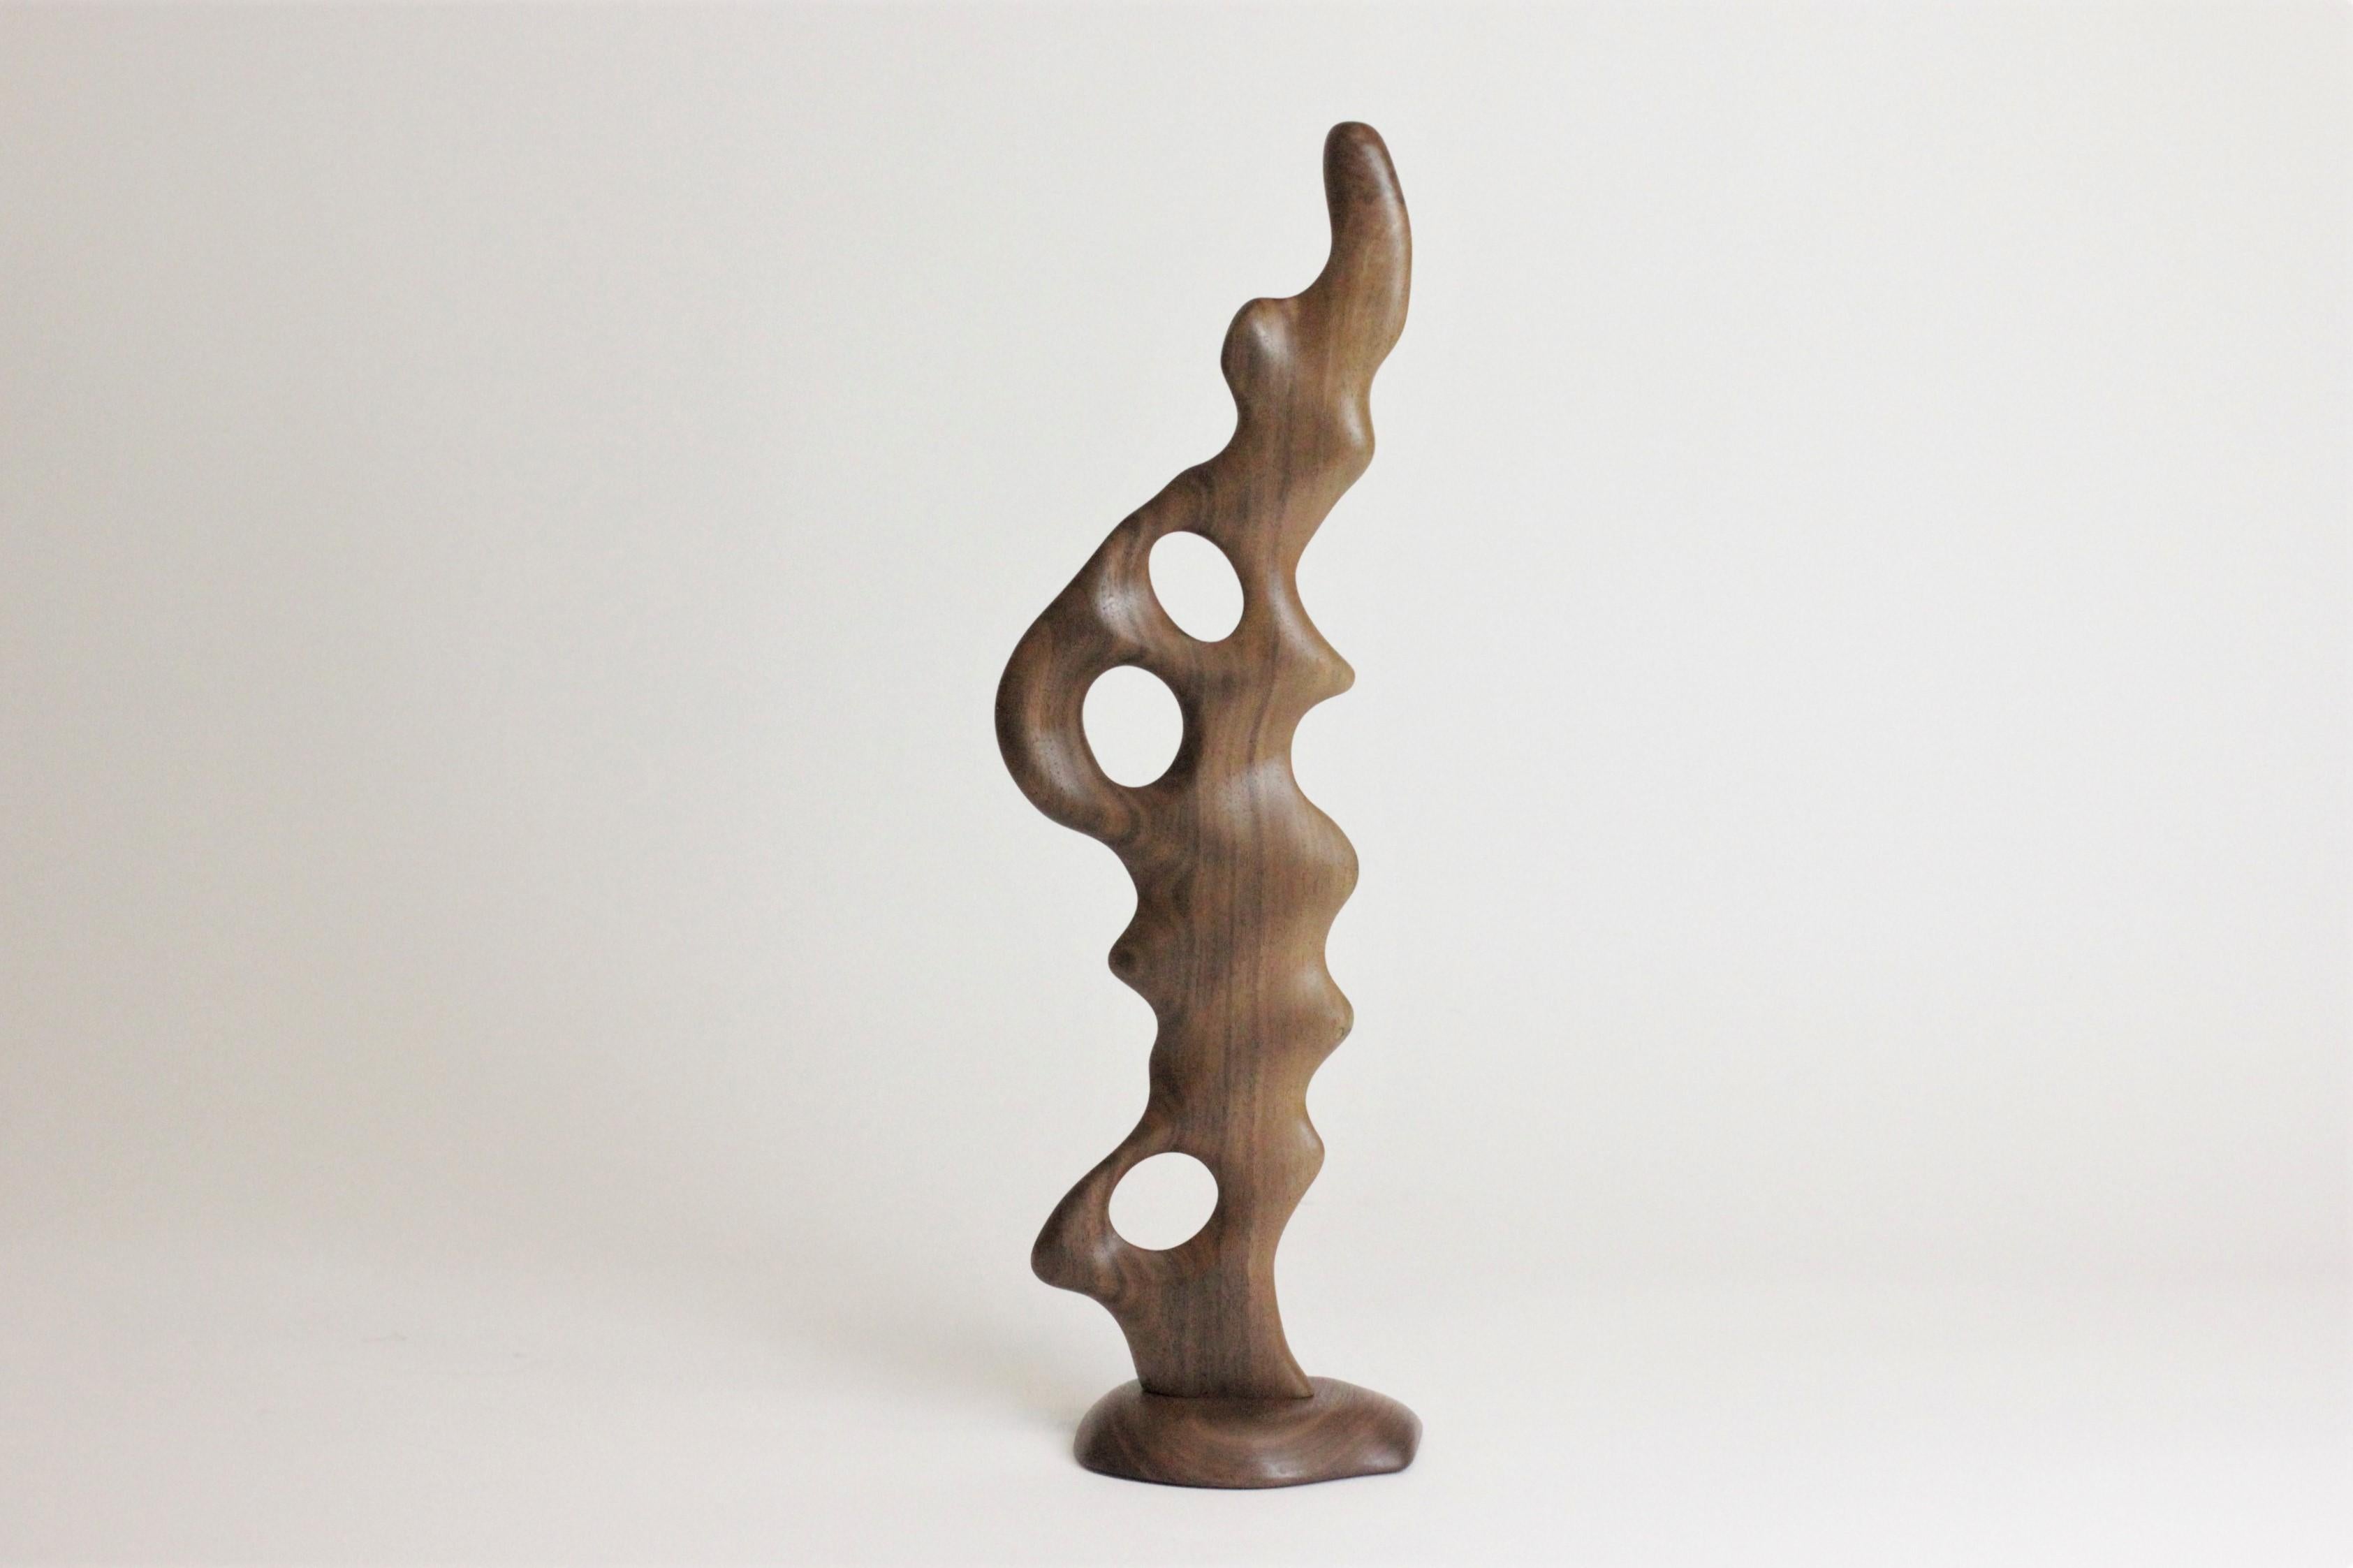 One-of-a-kind sculpture inspired by biomorphic shapes. hand carved by an independent wood-turning British artist from a single, solid piece of wood coated with wax layers to emphasise the natural grain pattern and sanded and buffed to a smooth